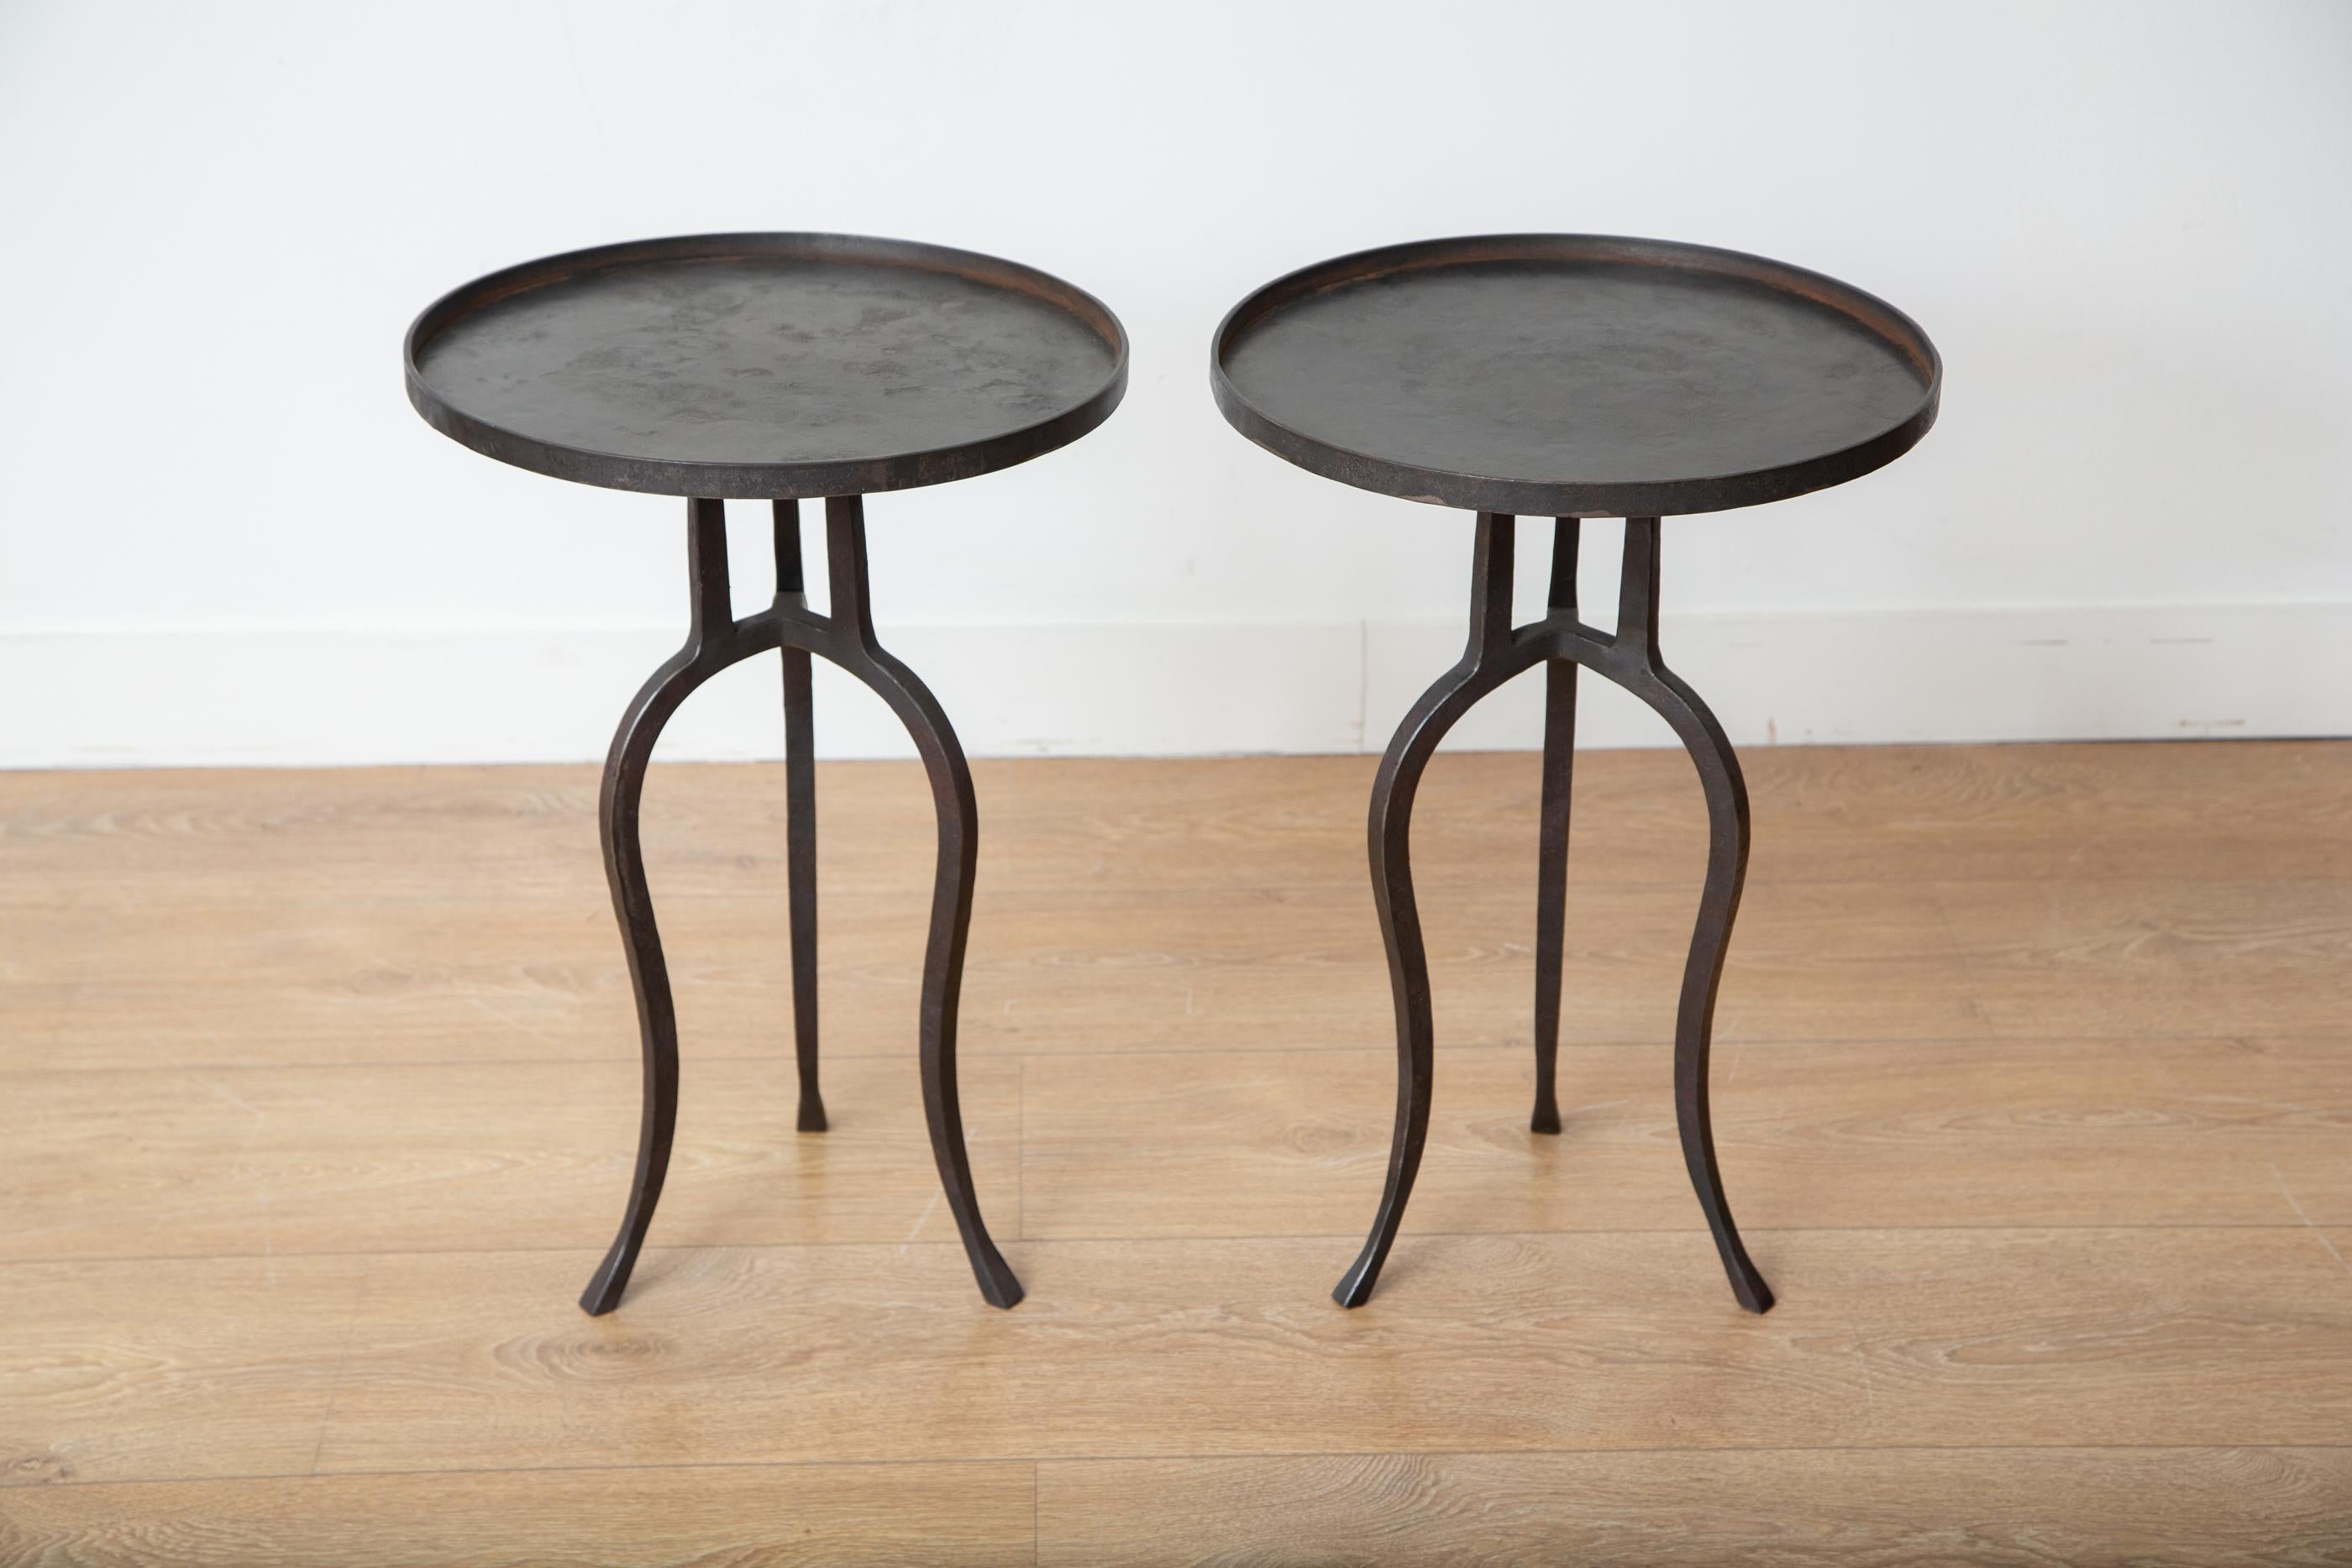 Pair of small black iron side tables, in stock.
This stunning wrought iron tripod side table is an eye-catching addition to any home decor. Its round top features a lip, and its hammered metal frame has a beautiful black patina that gives it a